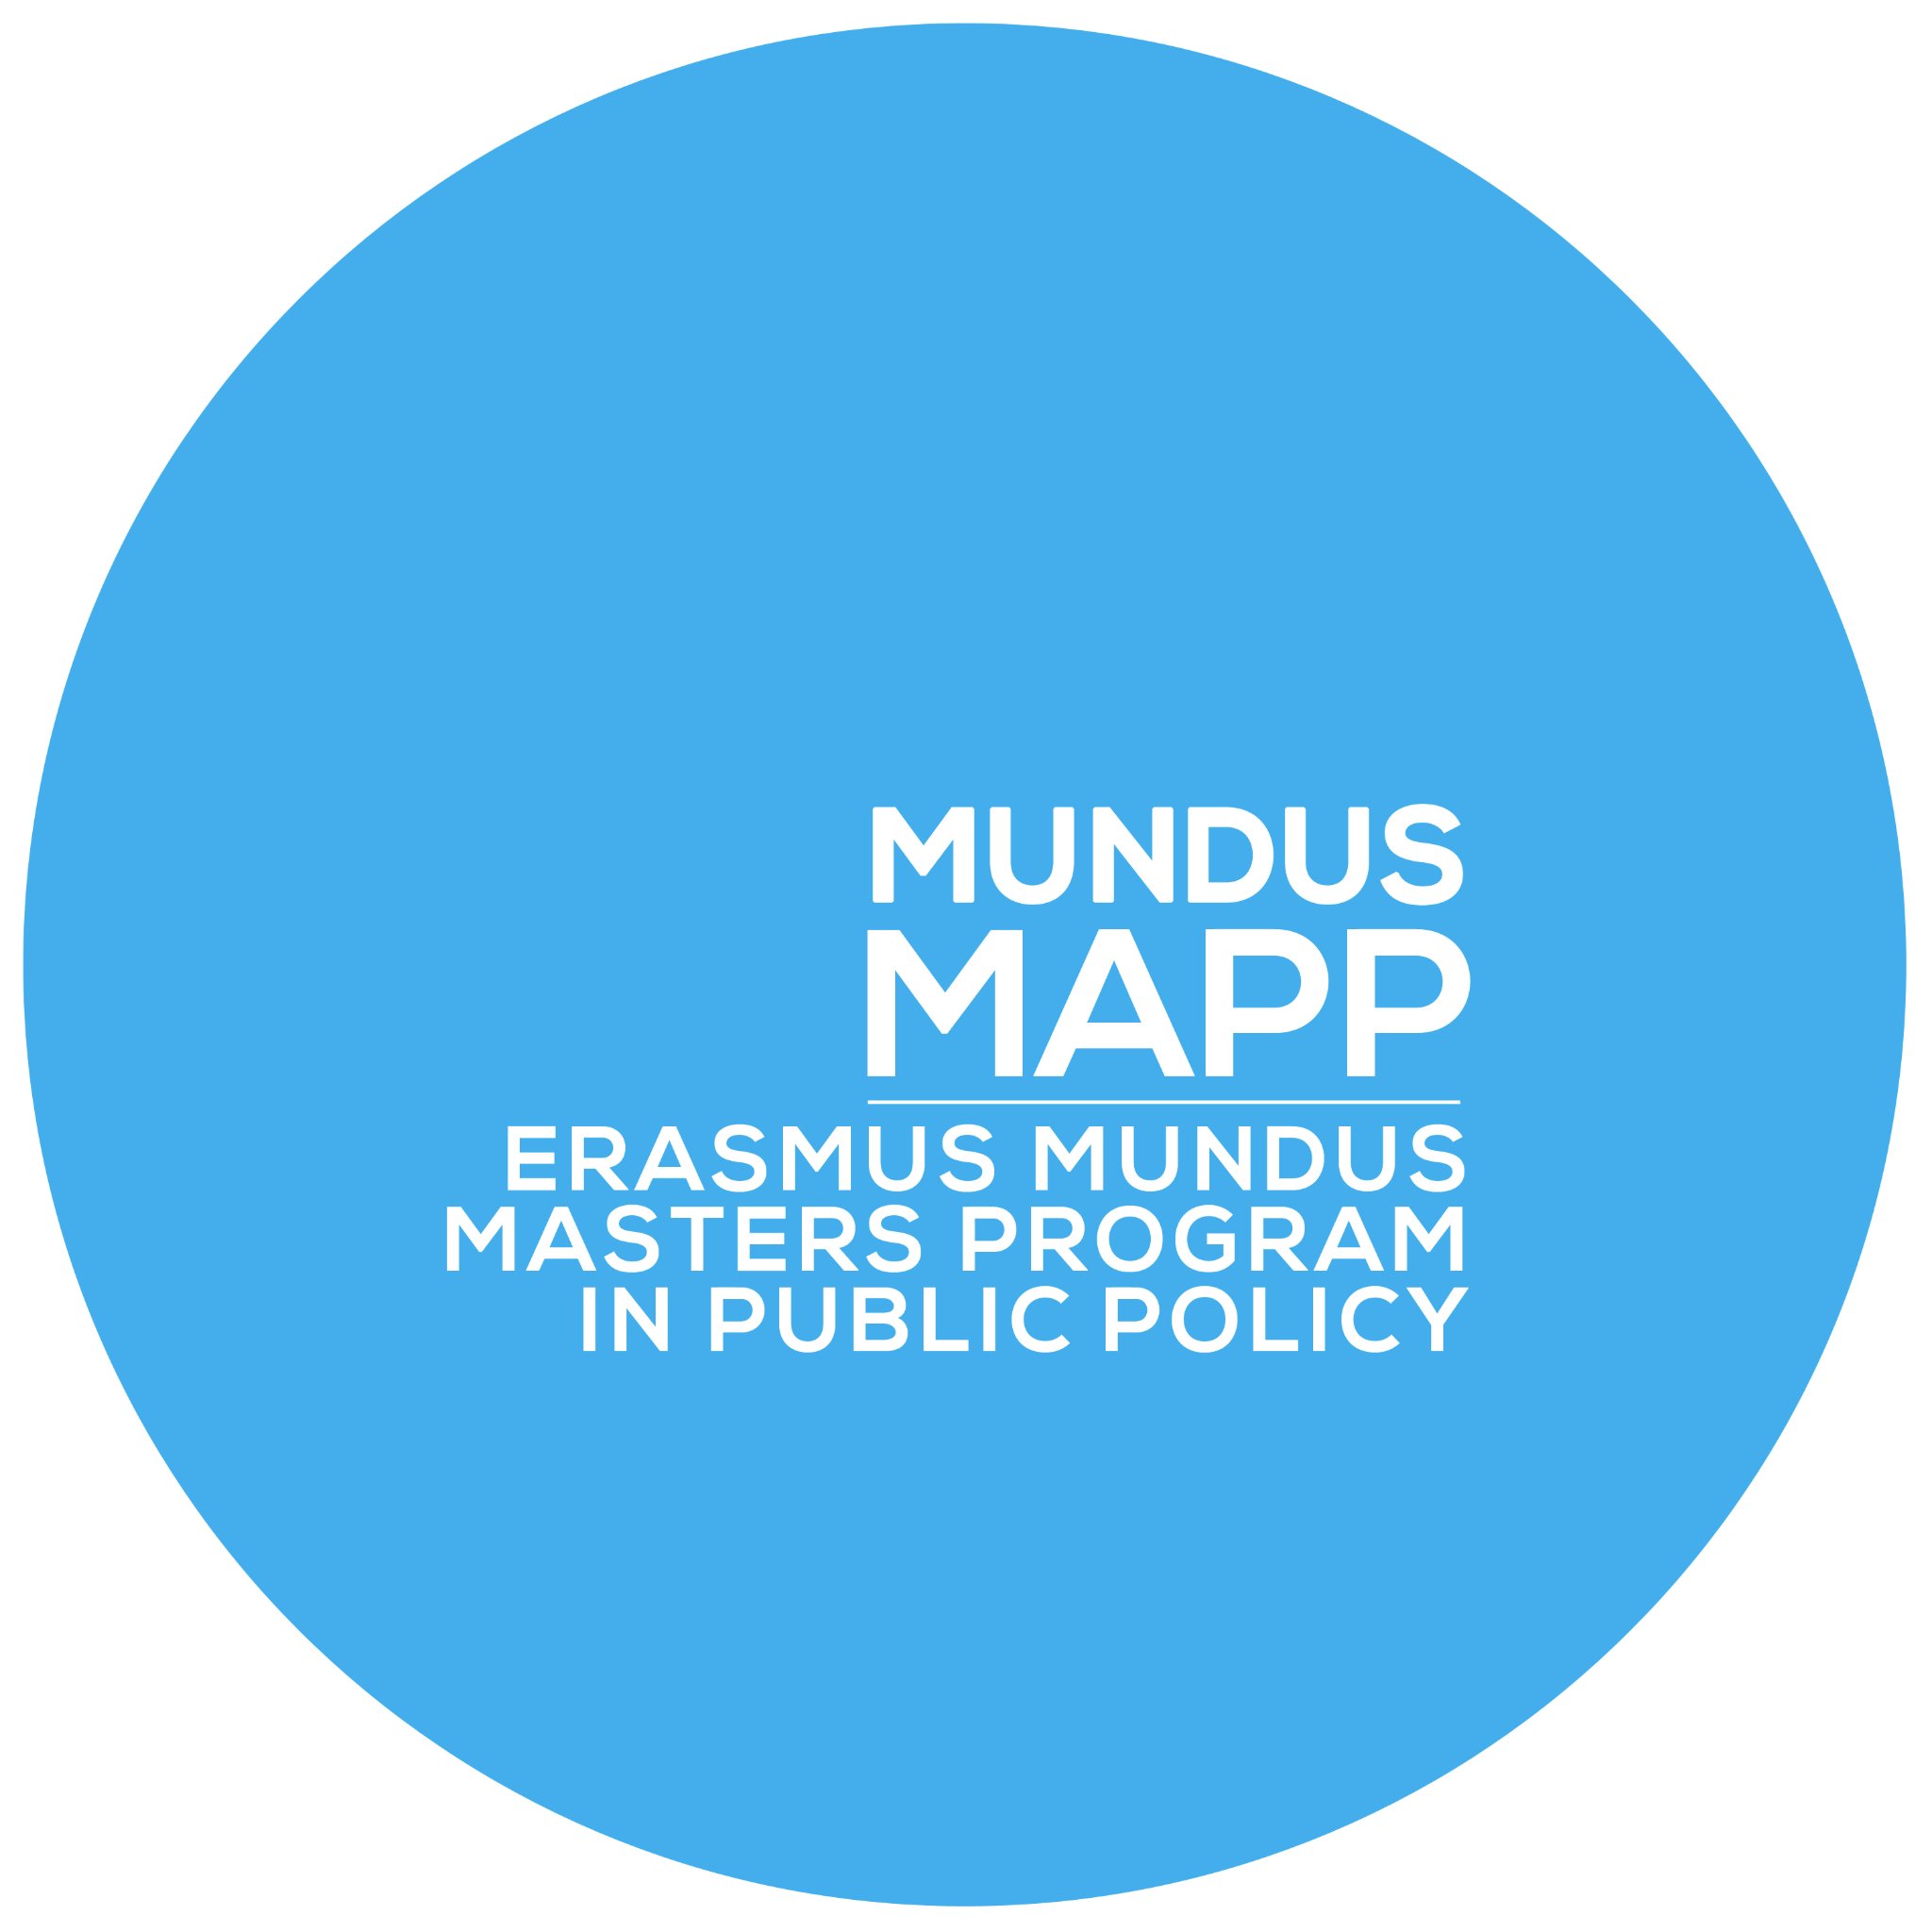 Two-year Erasmus Mundus Masters Program in Public Policy offered by @ceuhungary @issnl @IBEI @UniOfYork co-funded by @EUErasmusPlus
https://t.co/cnrs8YivI6